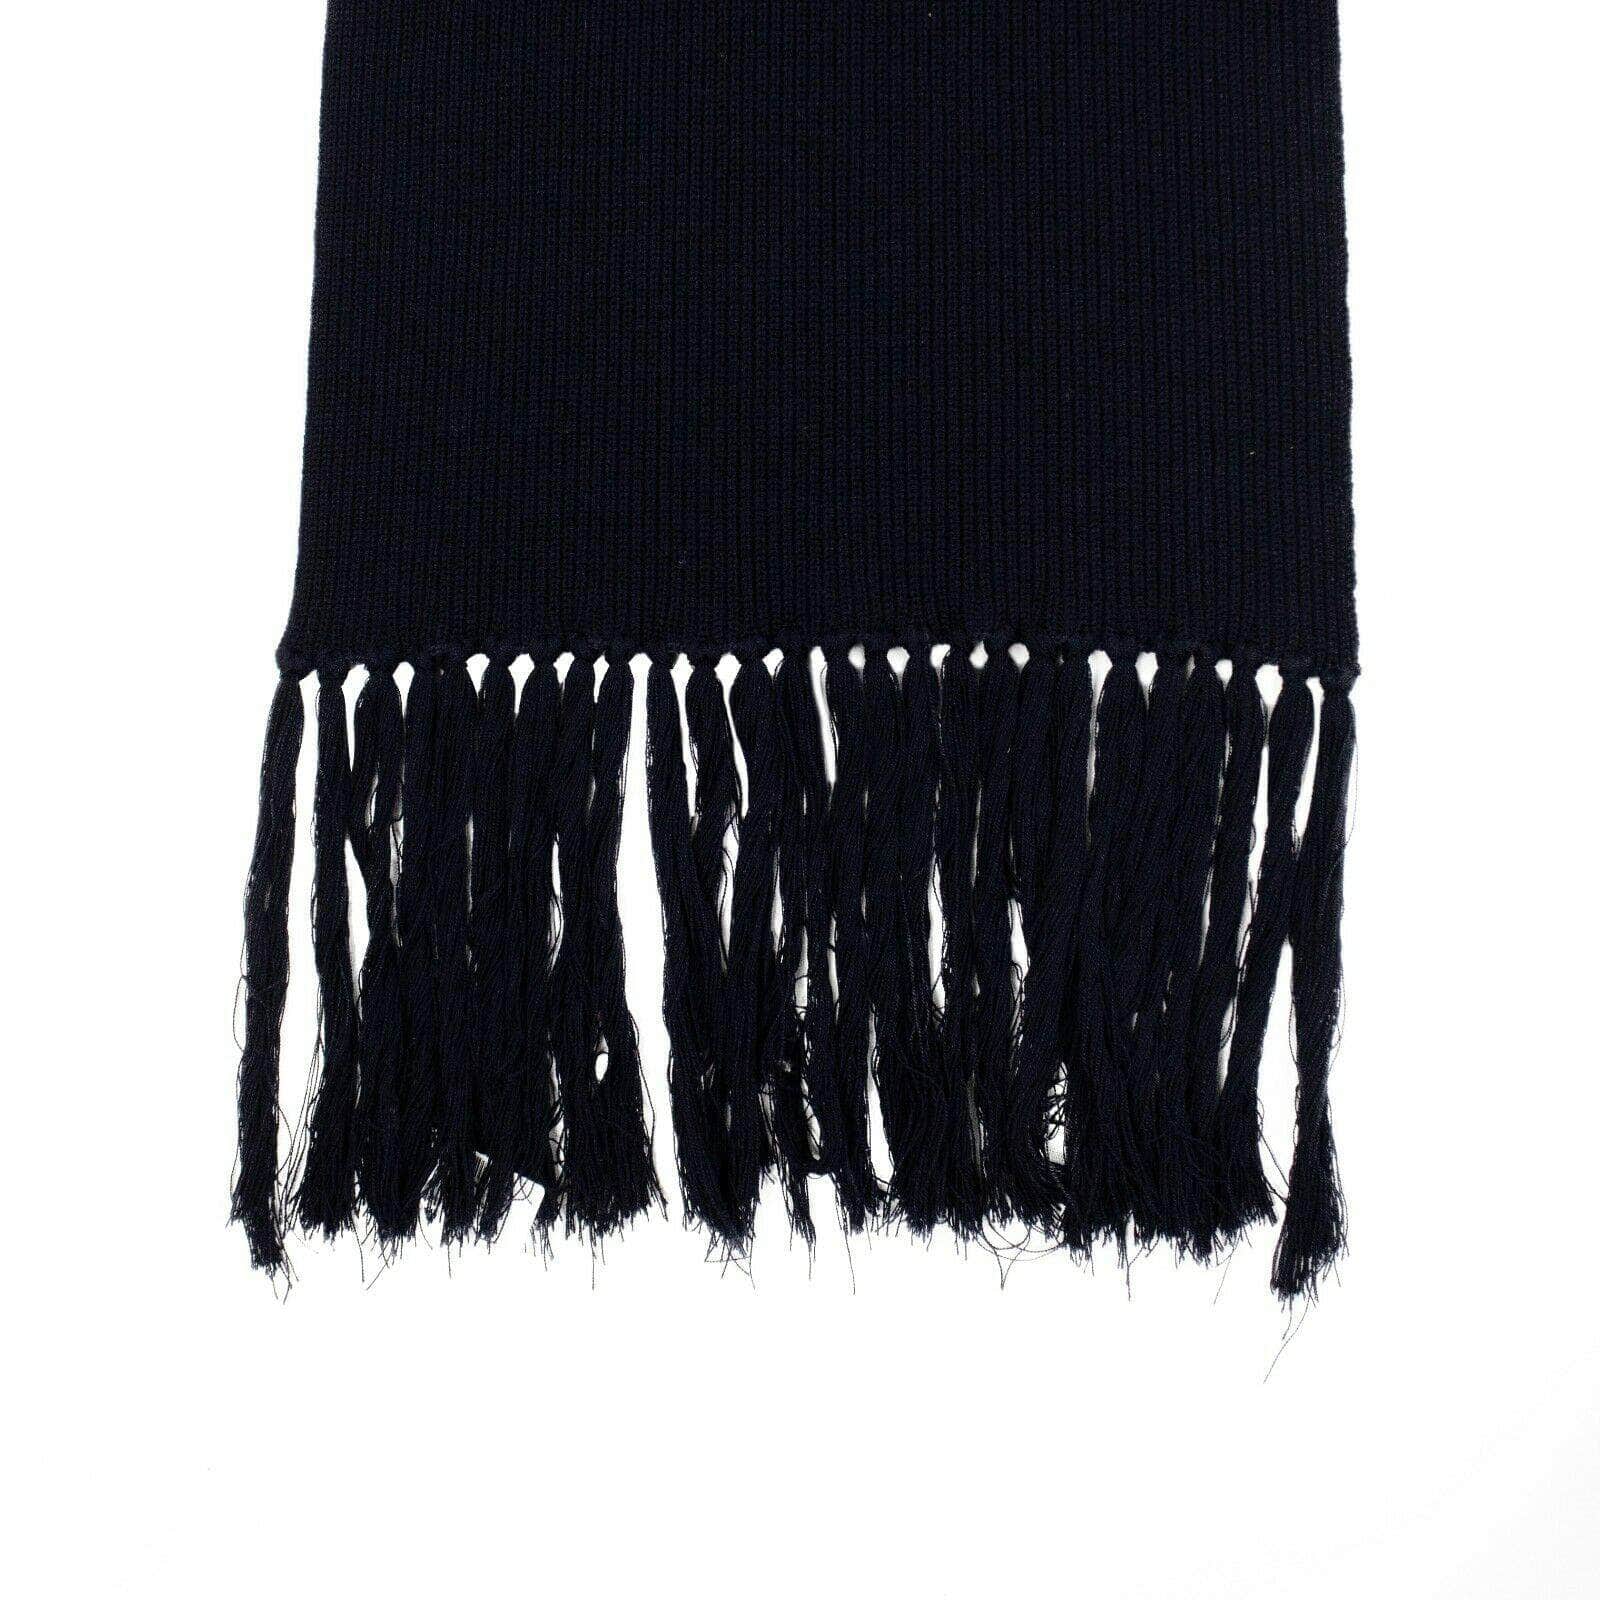 A_Plan_Application Men's Scarves Wool Cable Knit Scarf - Navy Blue 74NGG-AP-1005 74NGG-AP-1005